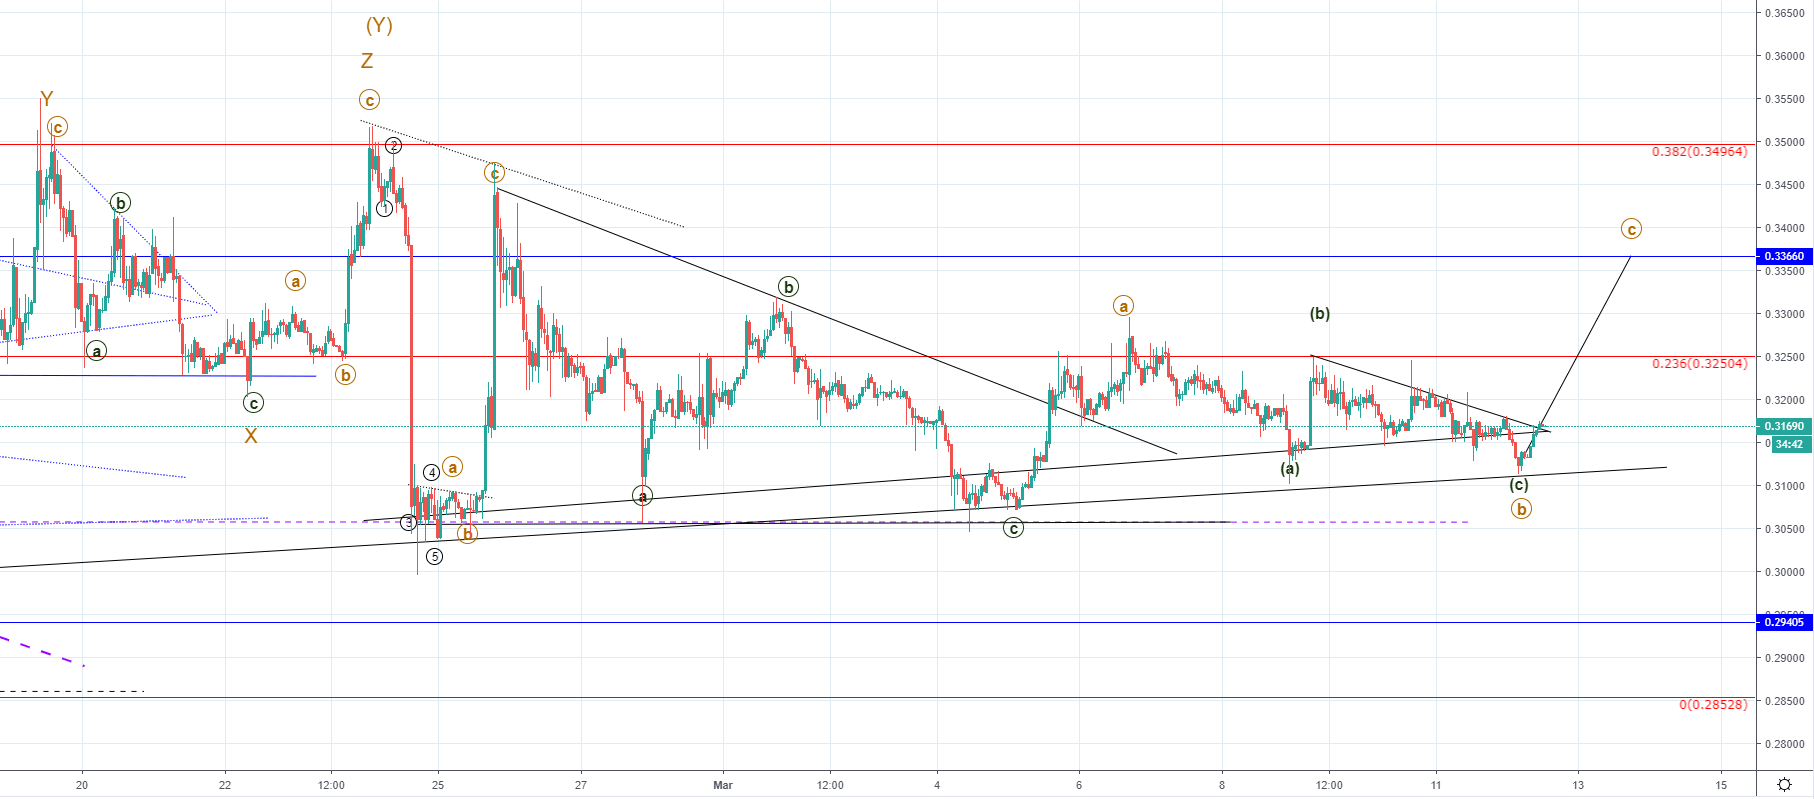 BTC/USD and XRP/USD outlook: more upside expected